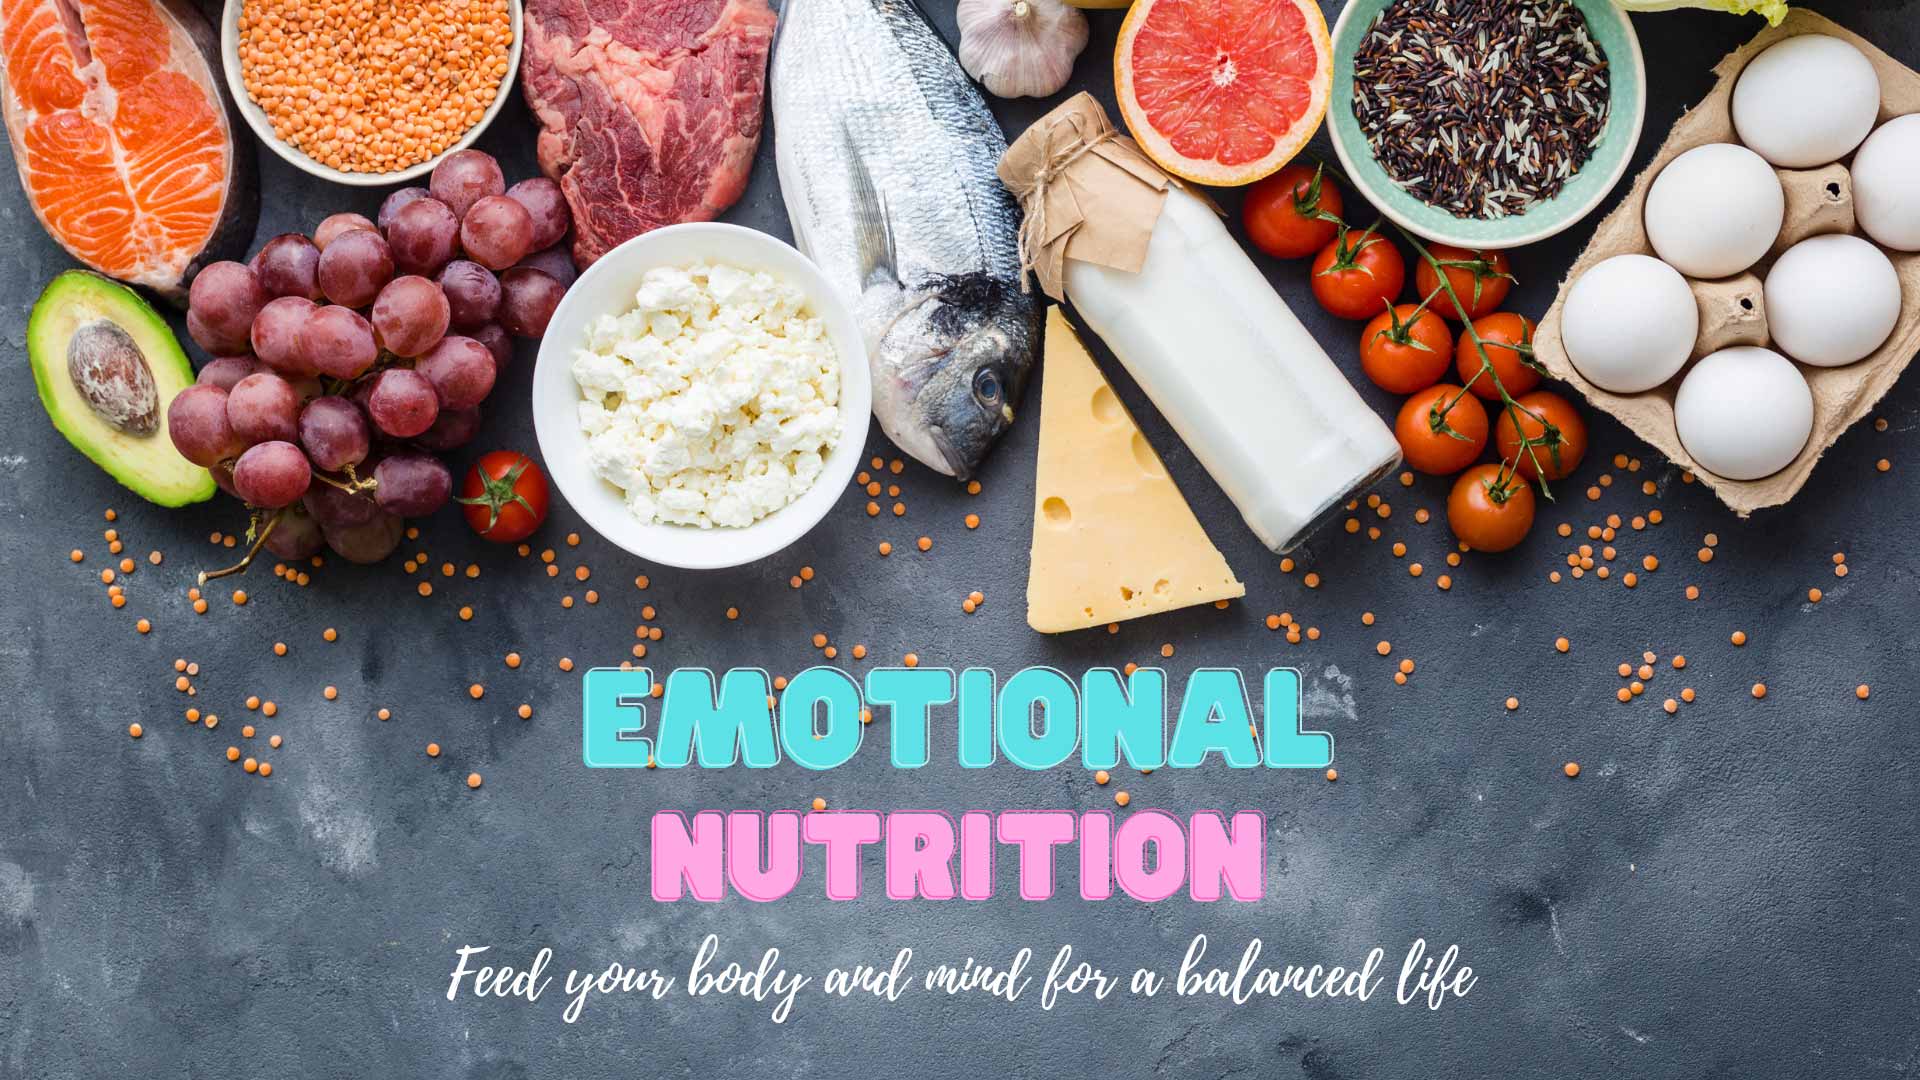 Emotional Nutrition: feed your body and mind for a balanced life